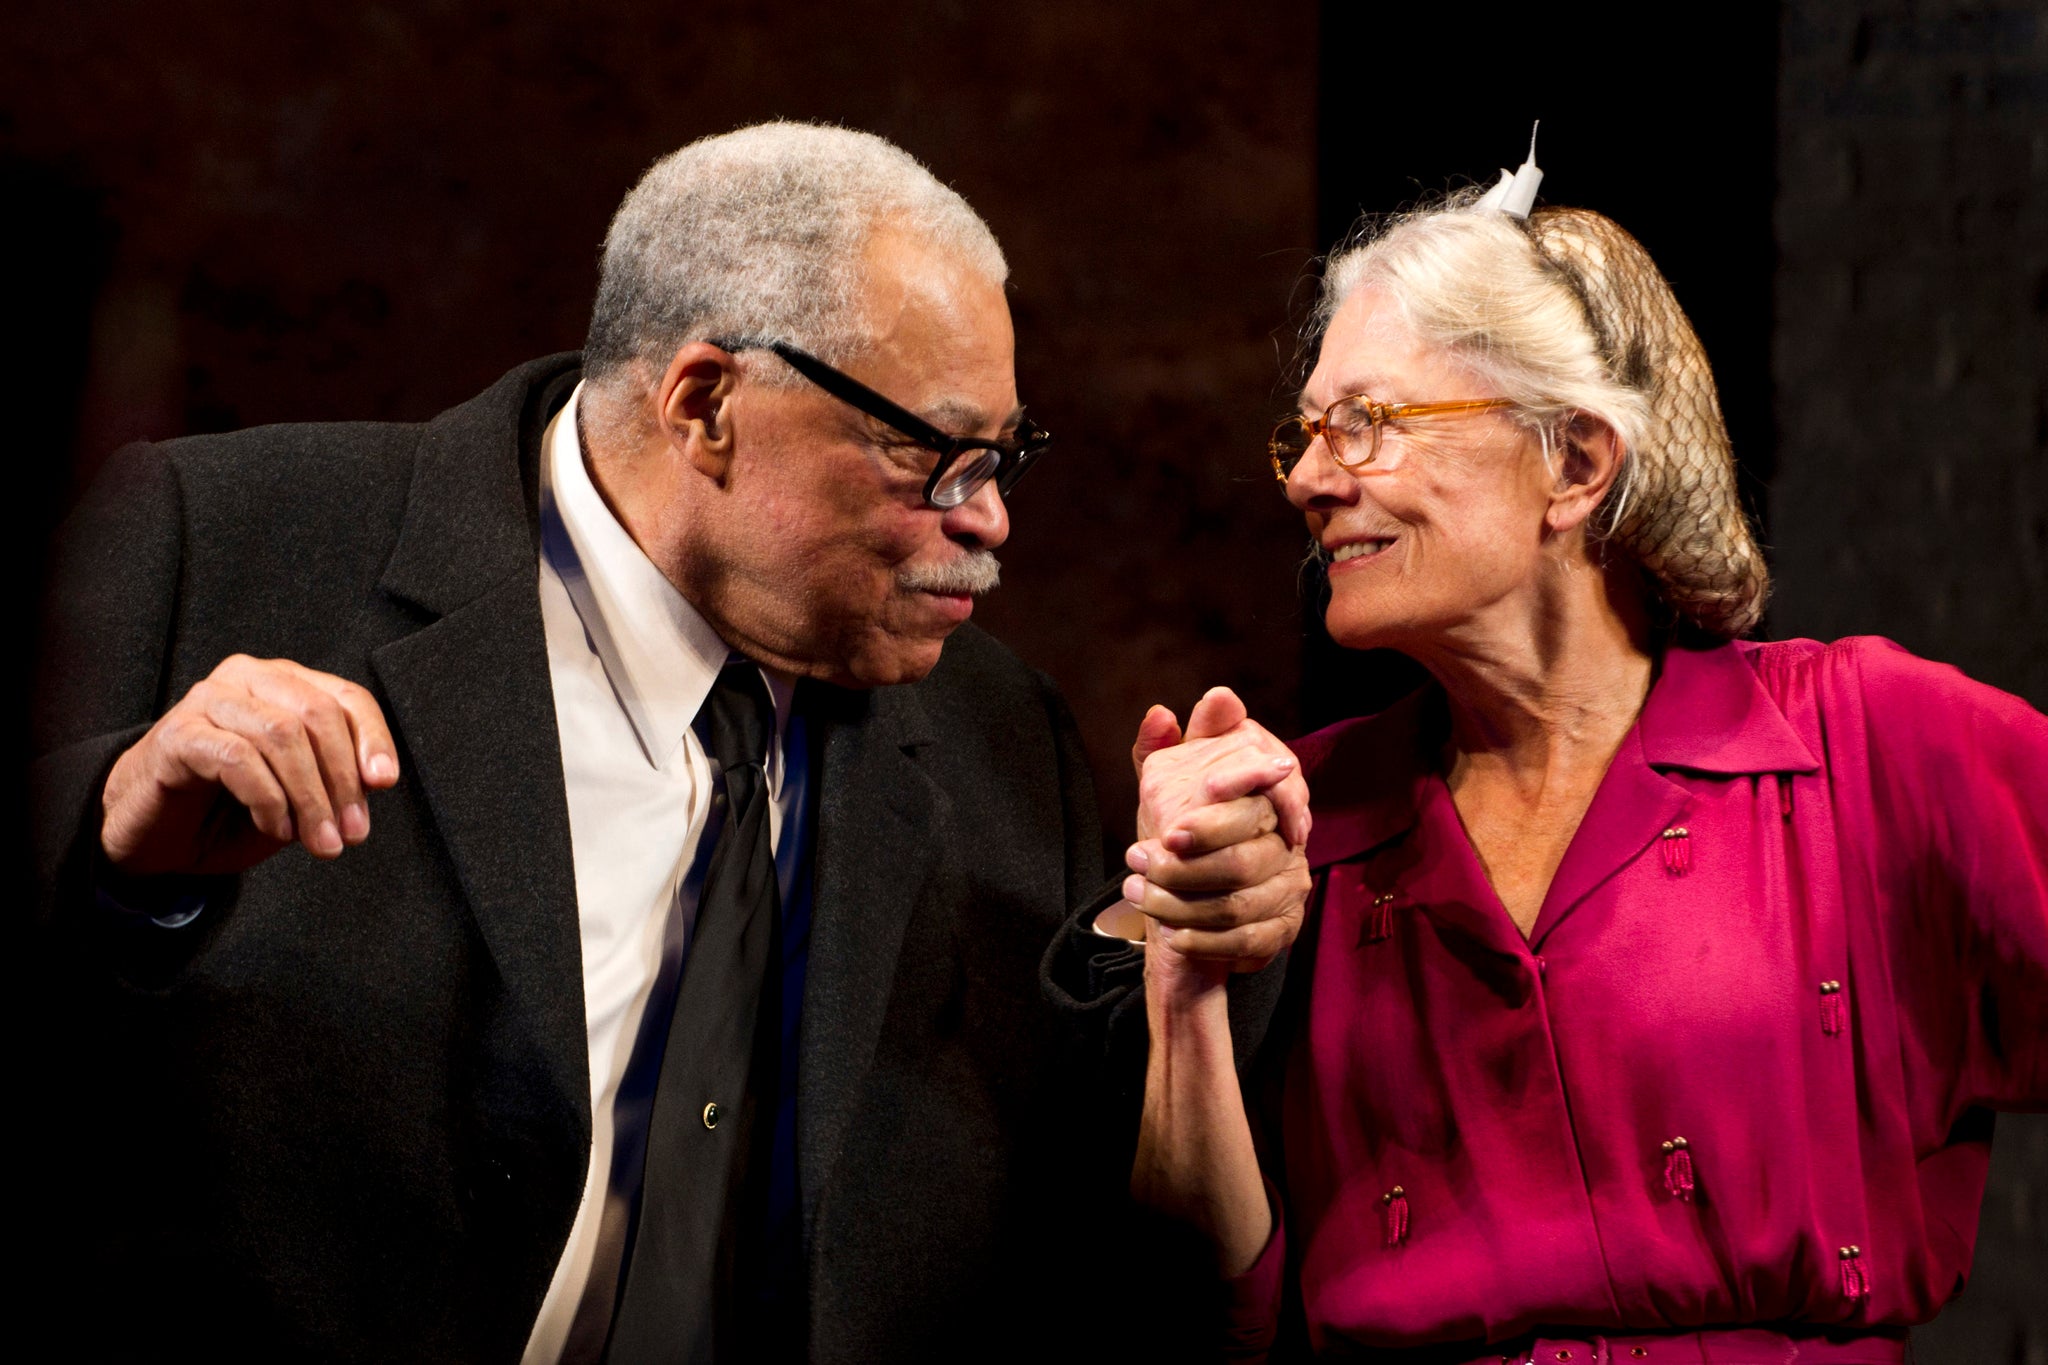 James Earl Jones, left, and Vanessa Redgrave appear at the curtain call for the opening night of "Driving Miss Daisy" on Broadway in New York.  Vanessa Redgrave and James Earl Jones are reuniting onstage to play lovers Beatrice and Benedick in Shakespeare